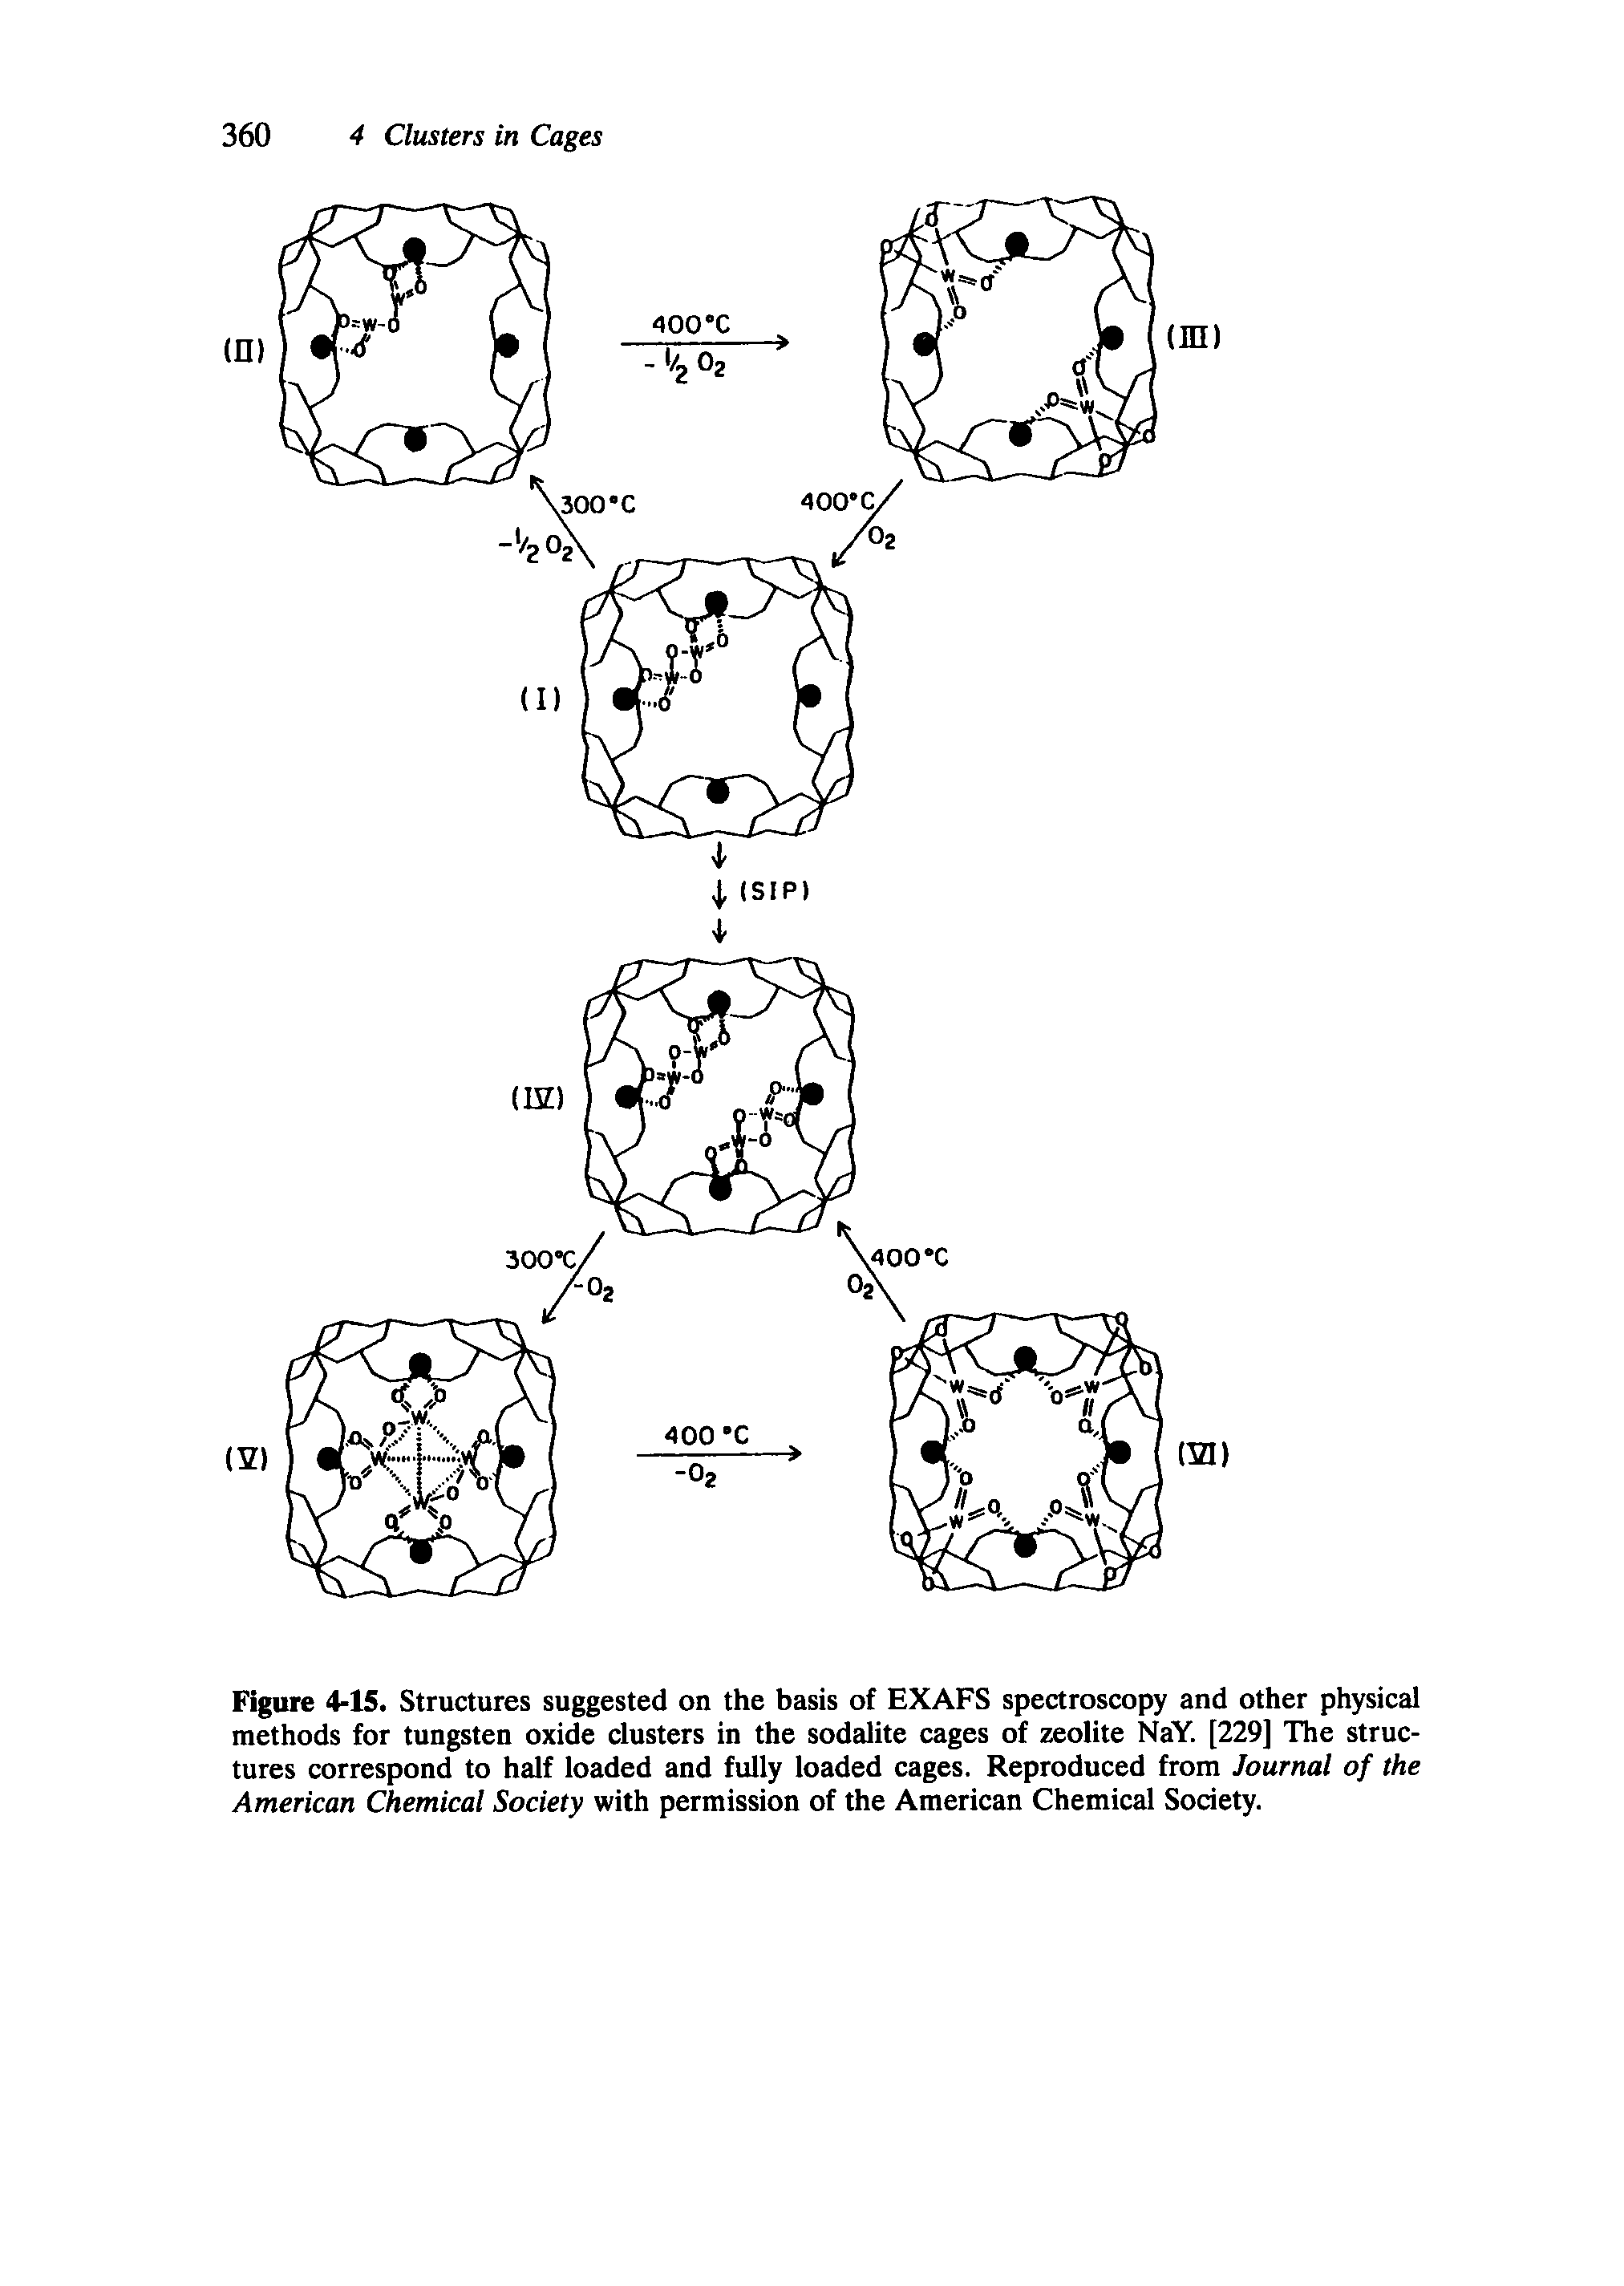 Figure 4-15. Structures suggested on the basis of EXAFS spectroscopy and other physical methods for tungsten oxide clusters in the sodalite cages of zeolite NaY. [229] The structures correspond to half loaded and fully loaded cages. Reproduced from Journal of the American Chemical Society with permission of the American Chemical Society.